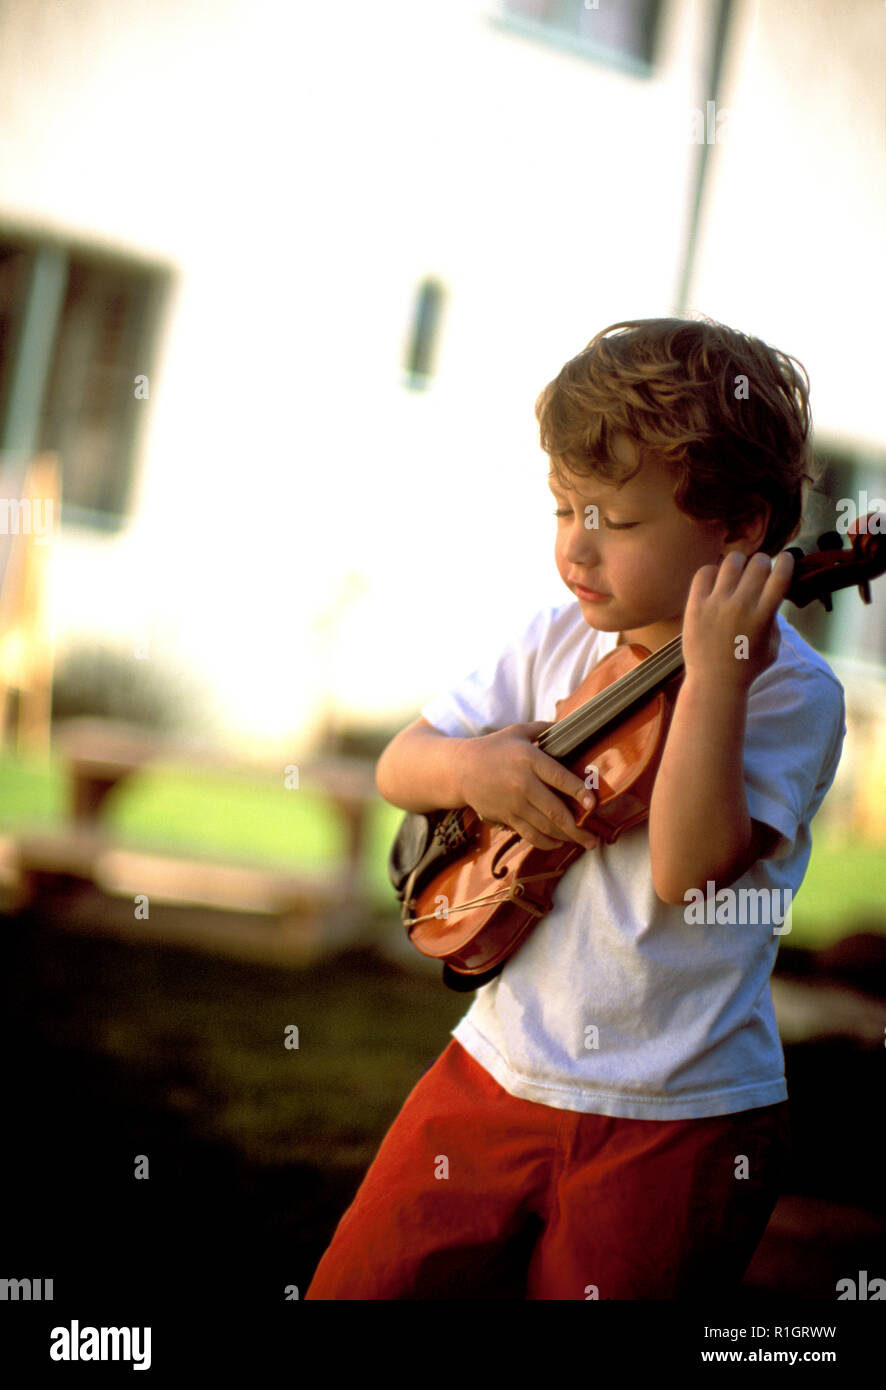 Little boy playing with a violin Stock Photo